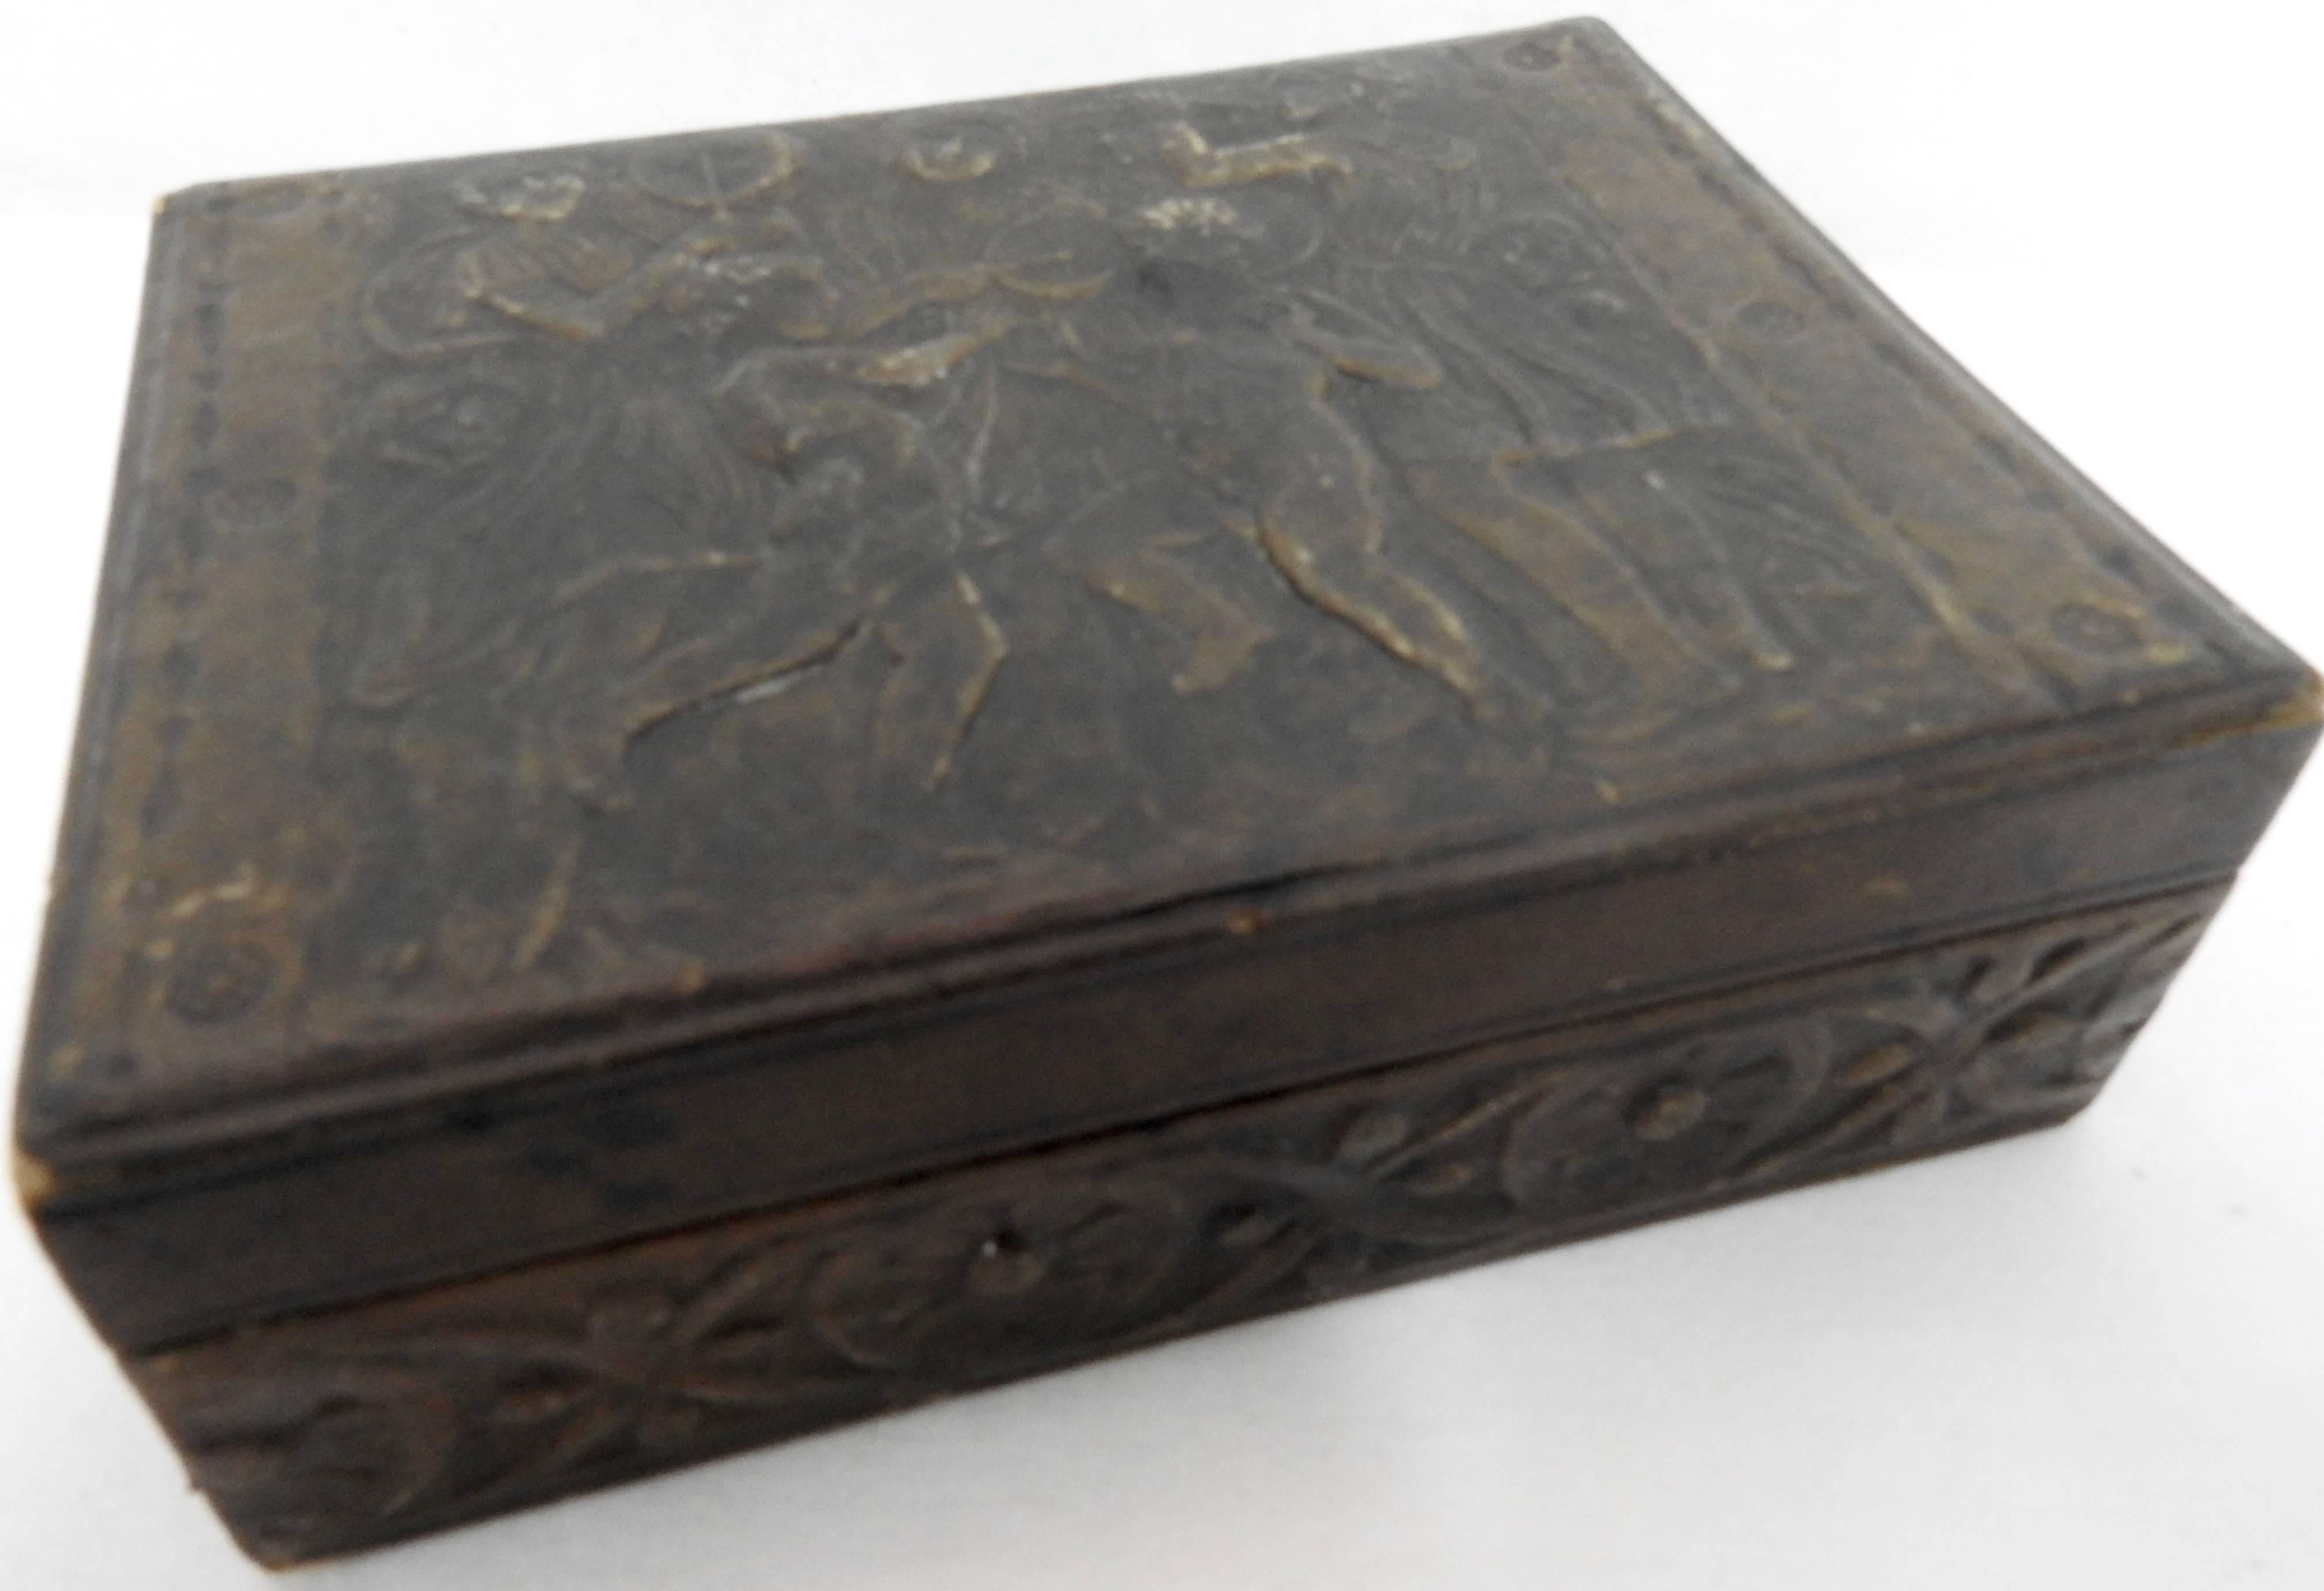 Dancers and musicians decorate the top of this detailed leather box from the Art Deco. It was created in Italy as you can see from the stamp on the back. A lovely floral motif surrounds the sides of the box. The inside is lined in a stiff paper.